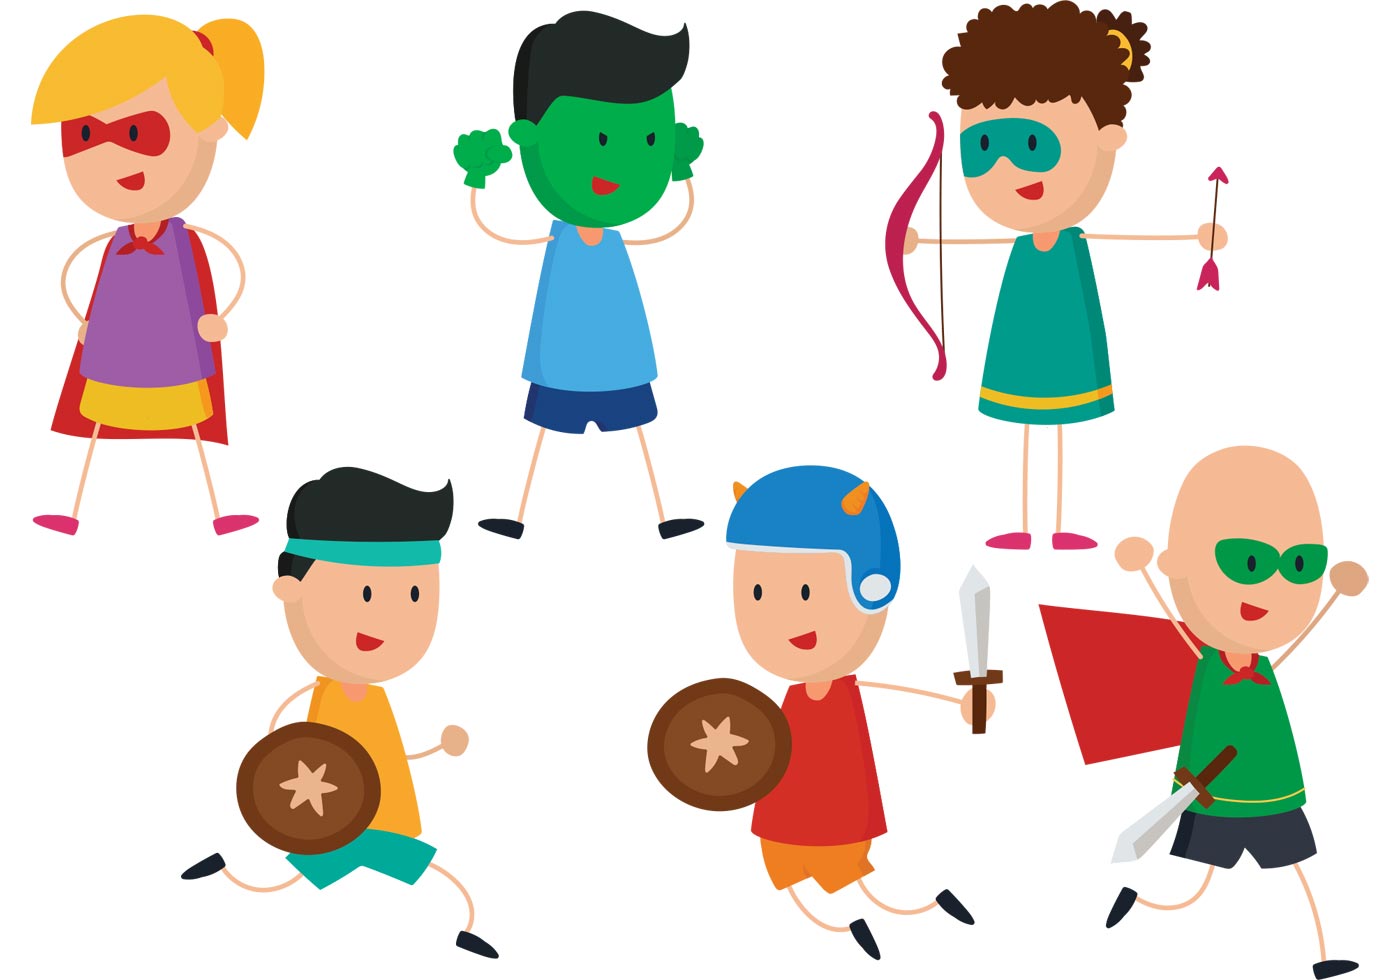 Kids Faces Free Vector Art - (3361 Free Downloads)